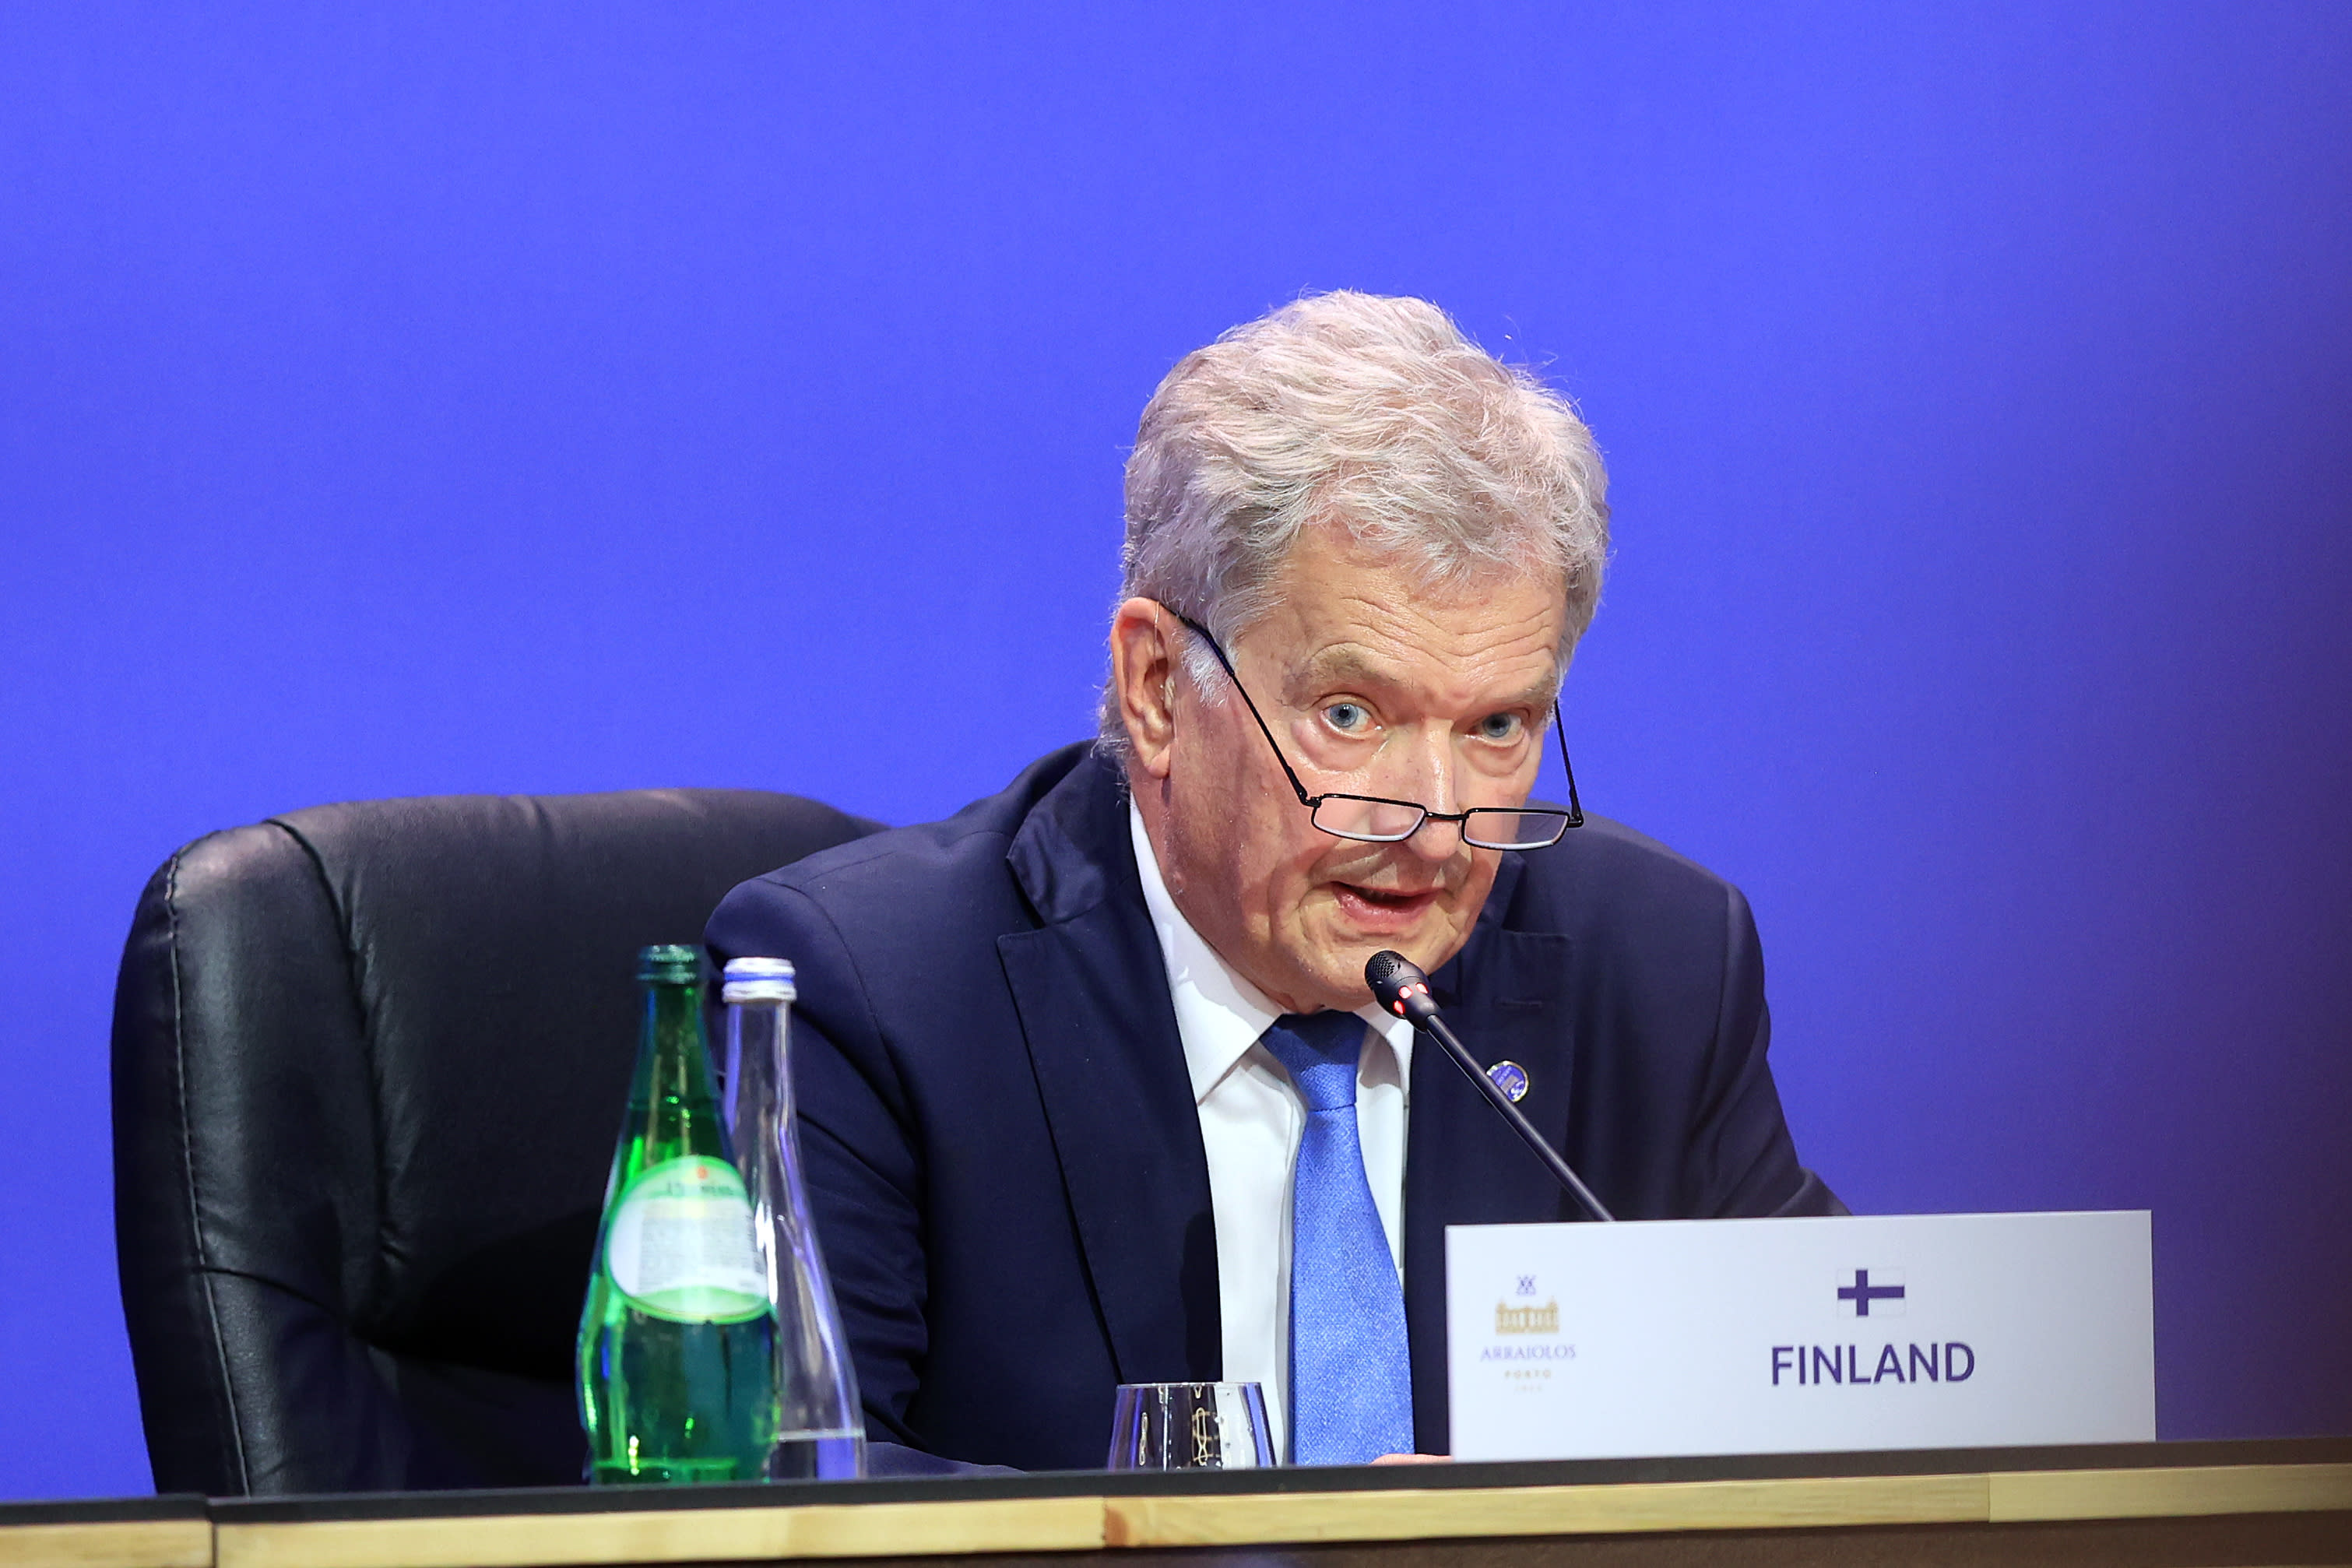 Suomen Niinistö is heading for an official visit to Poland